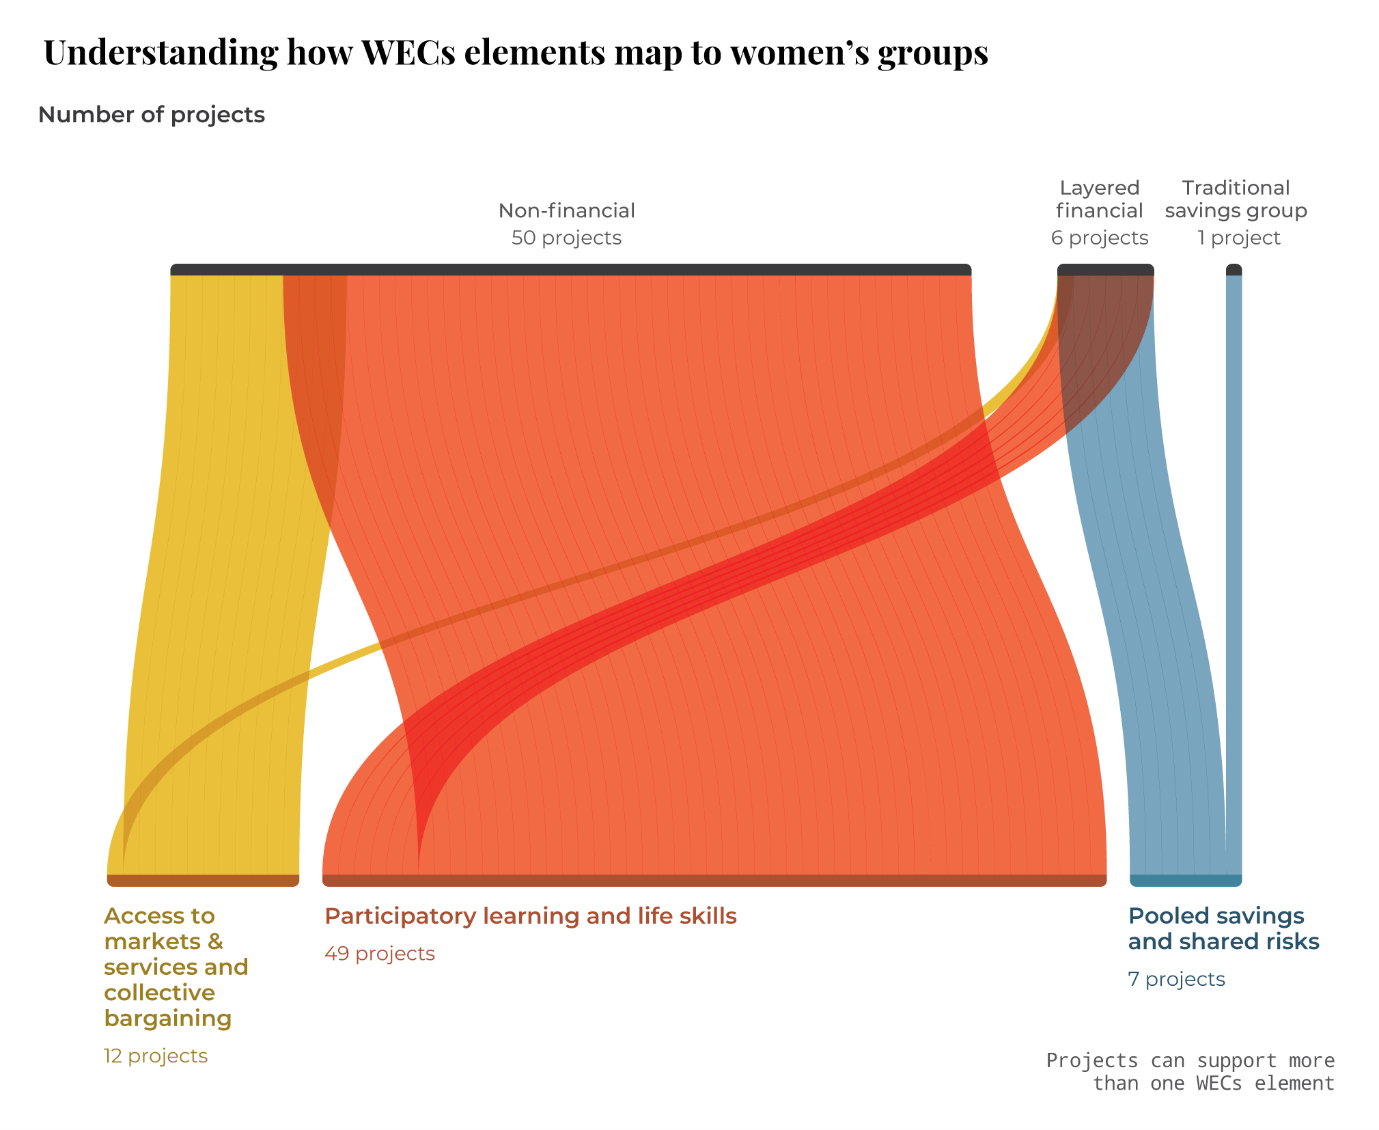 Figure 1: Relationship of women’s group models to WECs elements in Kenya, broken down by project numbers (2015-2019)